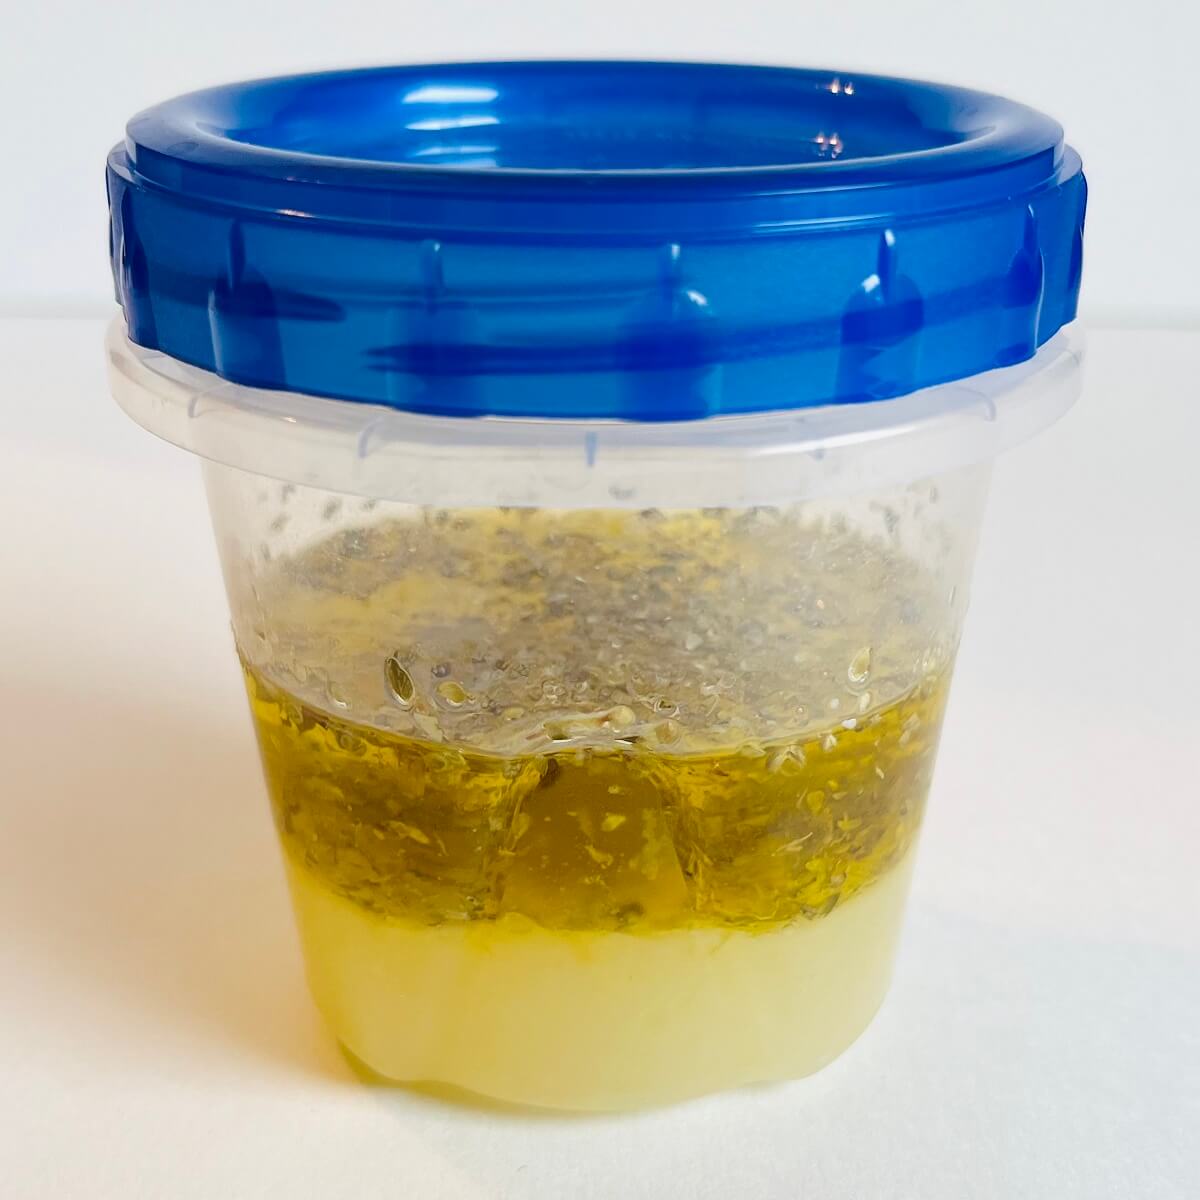 Ingredients for vinaigrette in a plastic container.